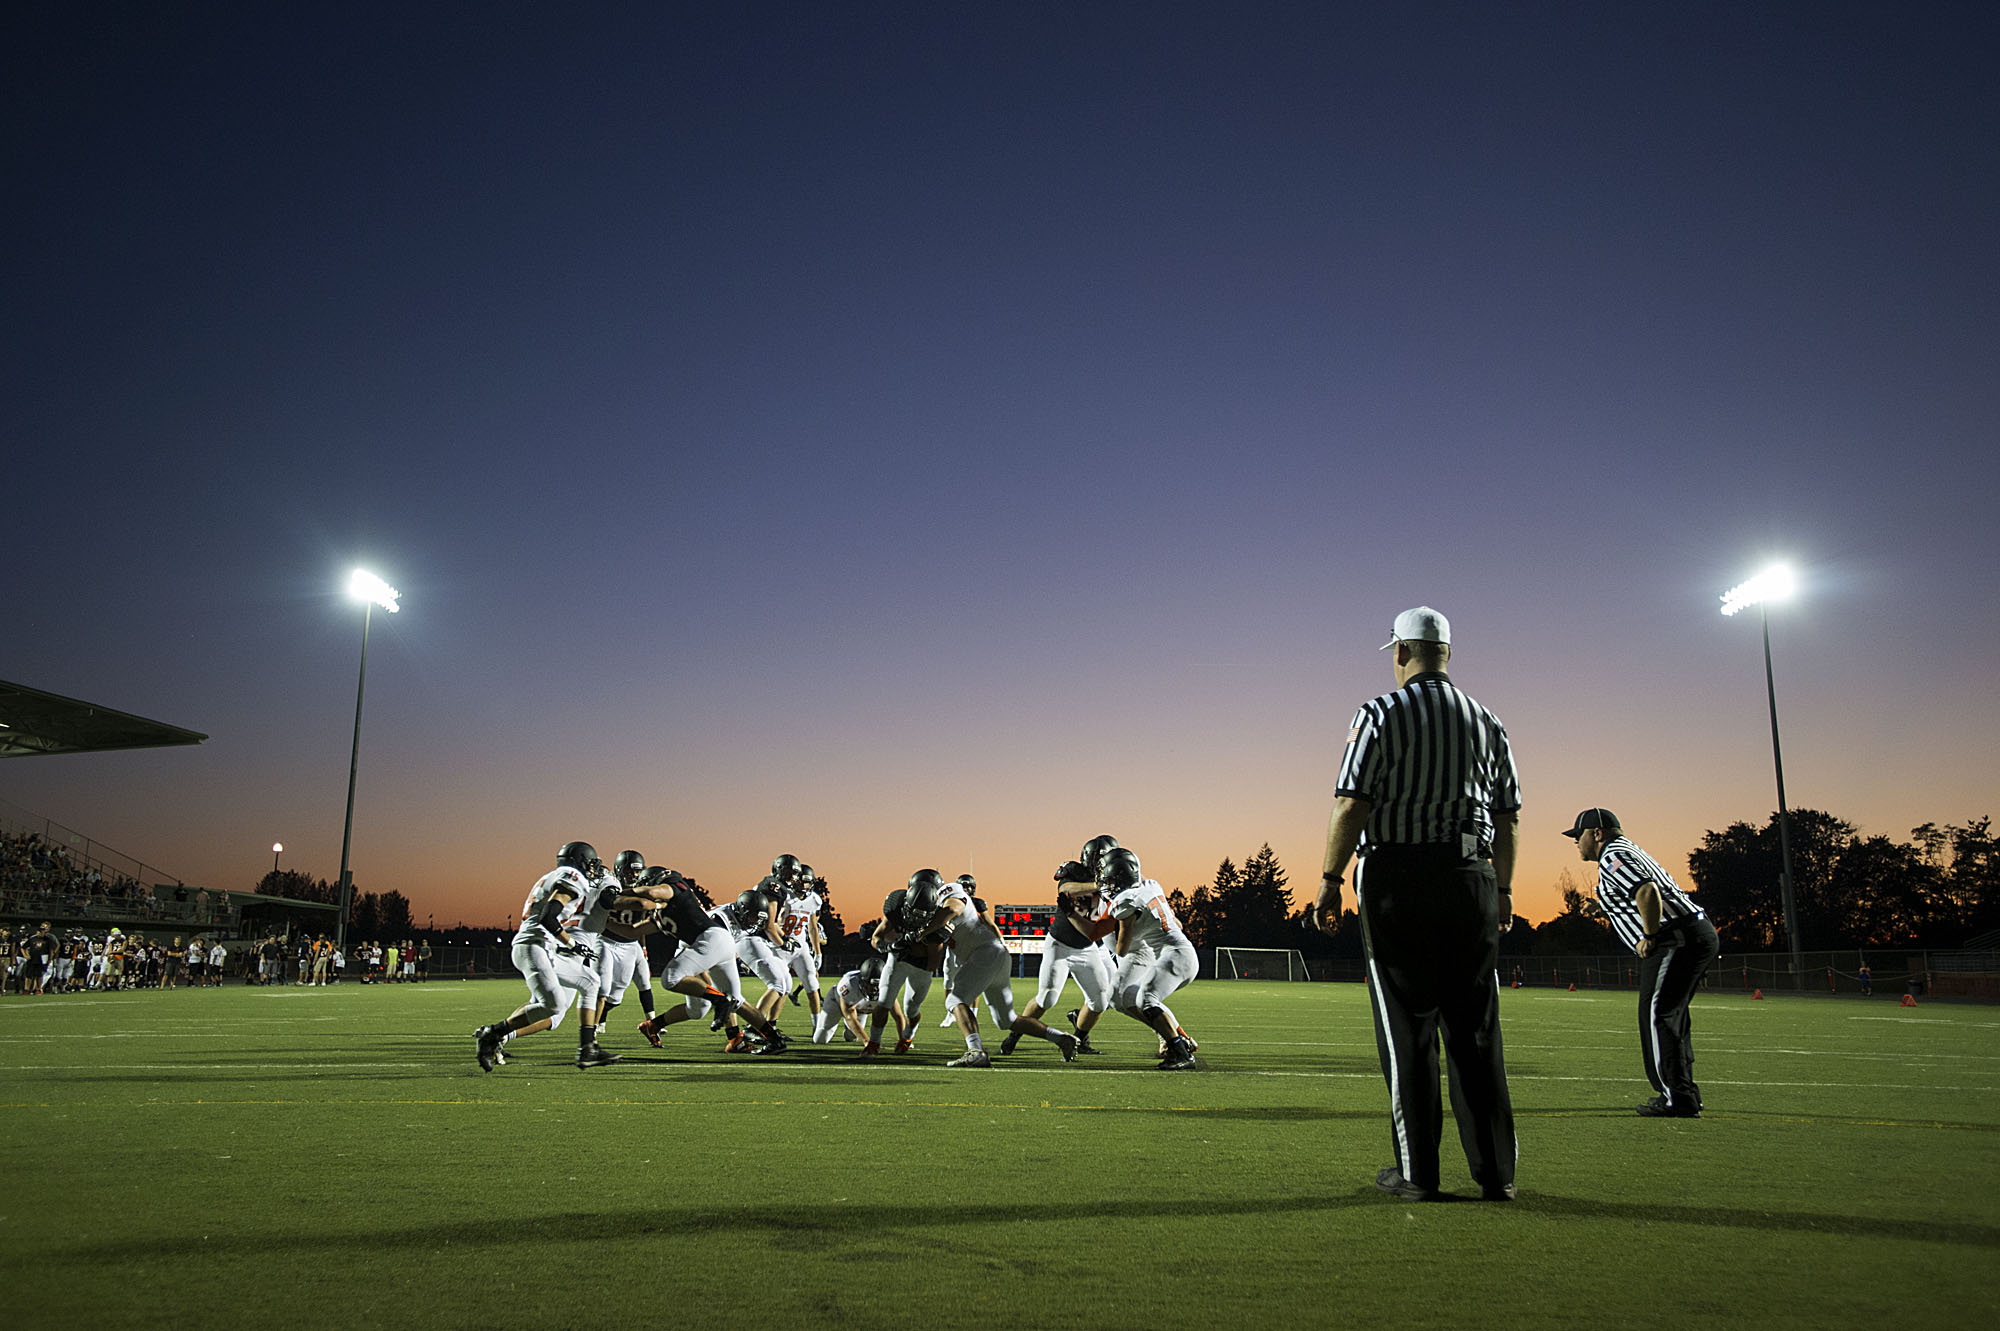 Members of the Battle Ground varsity team face off during a scrimmage as stadium lights illuminate the field Thursday evening, Aug. 25, 2016 at Battle Ground High School.